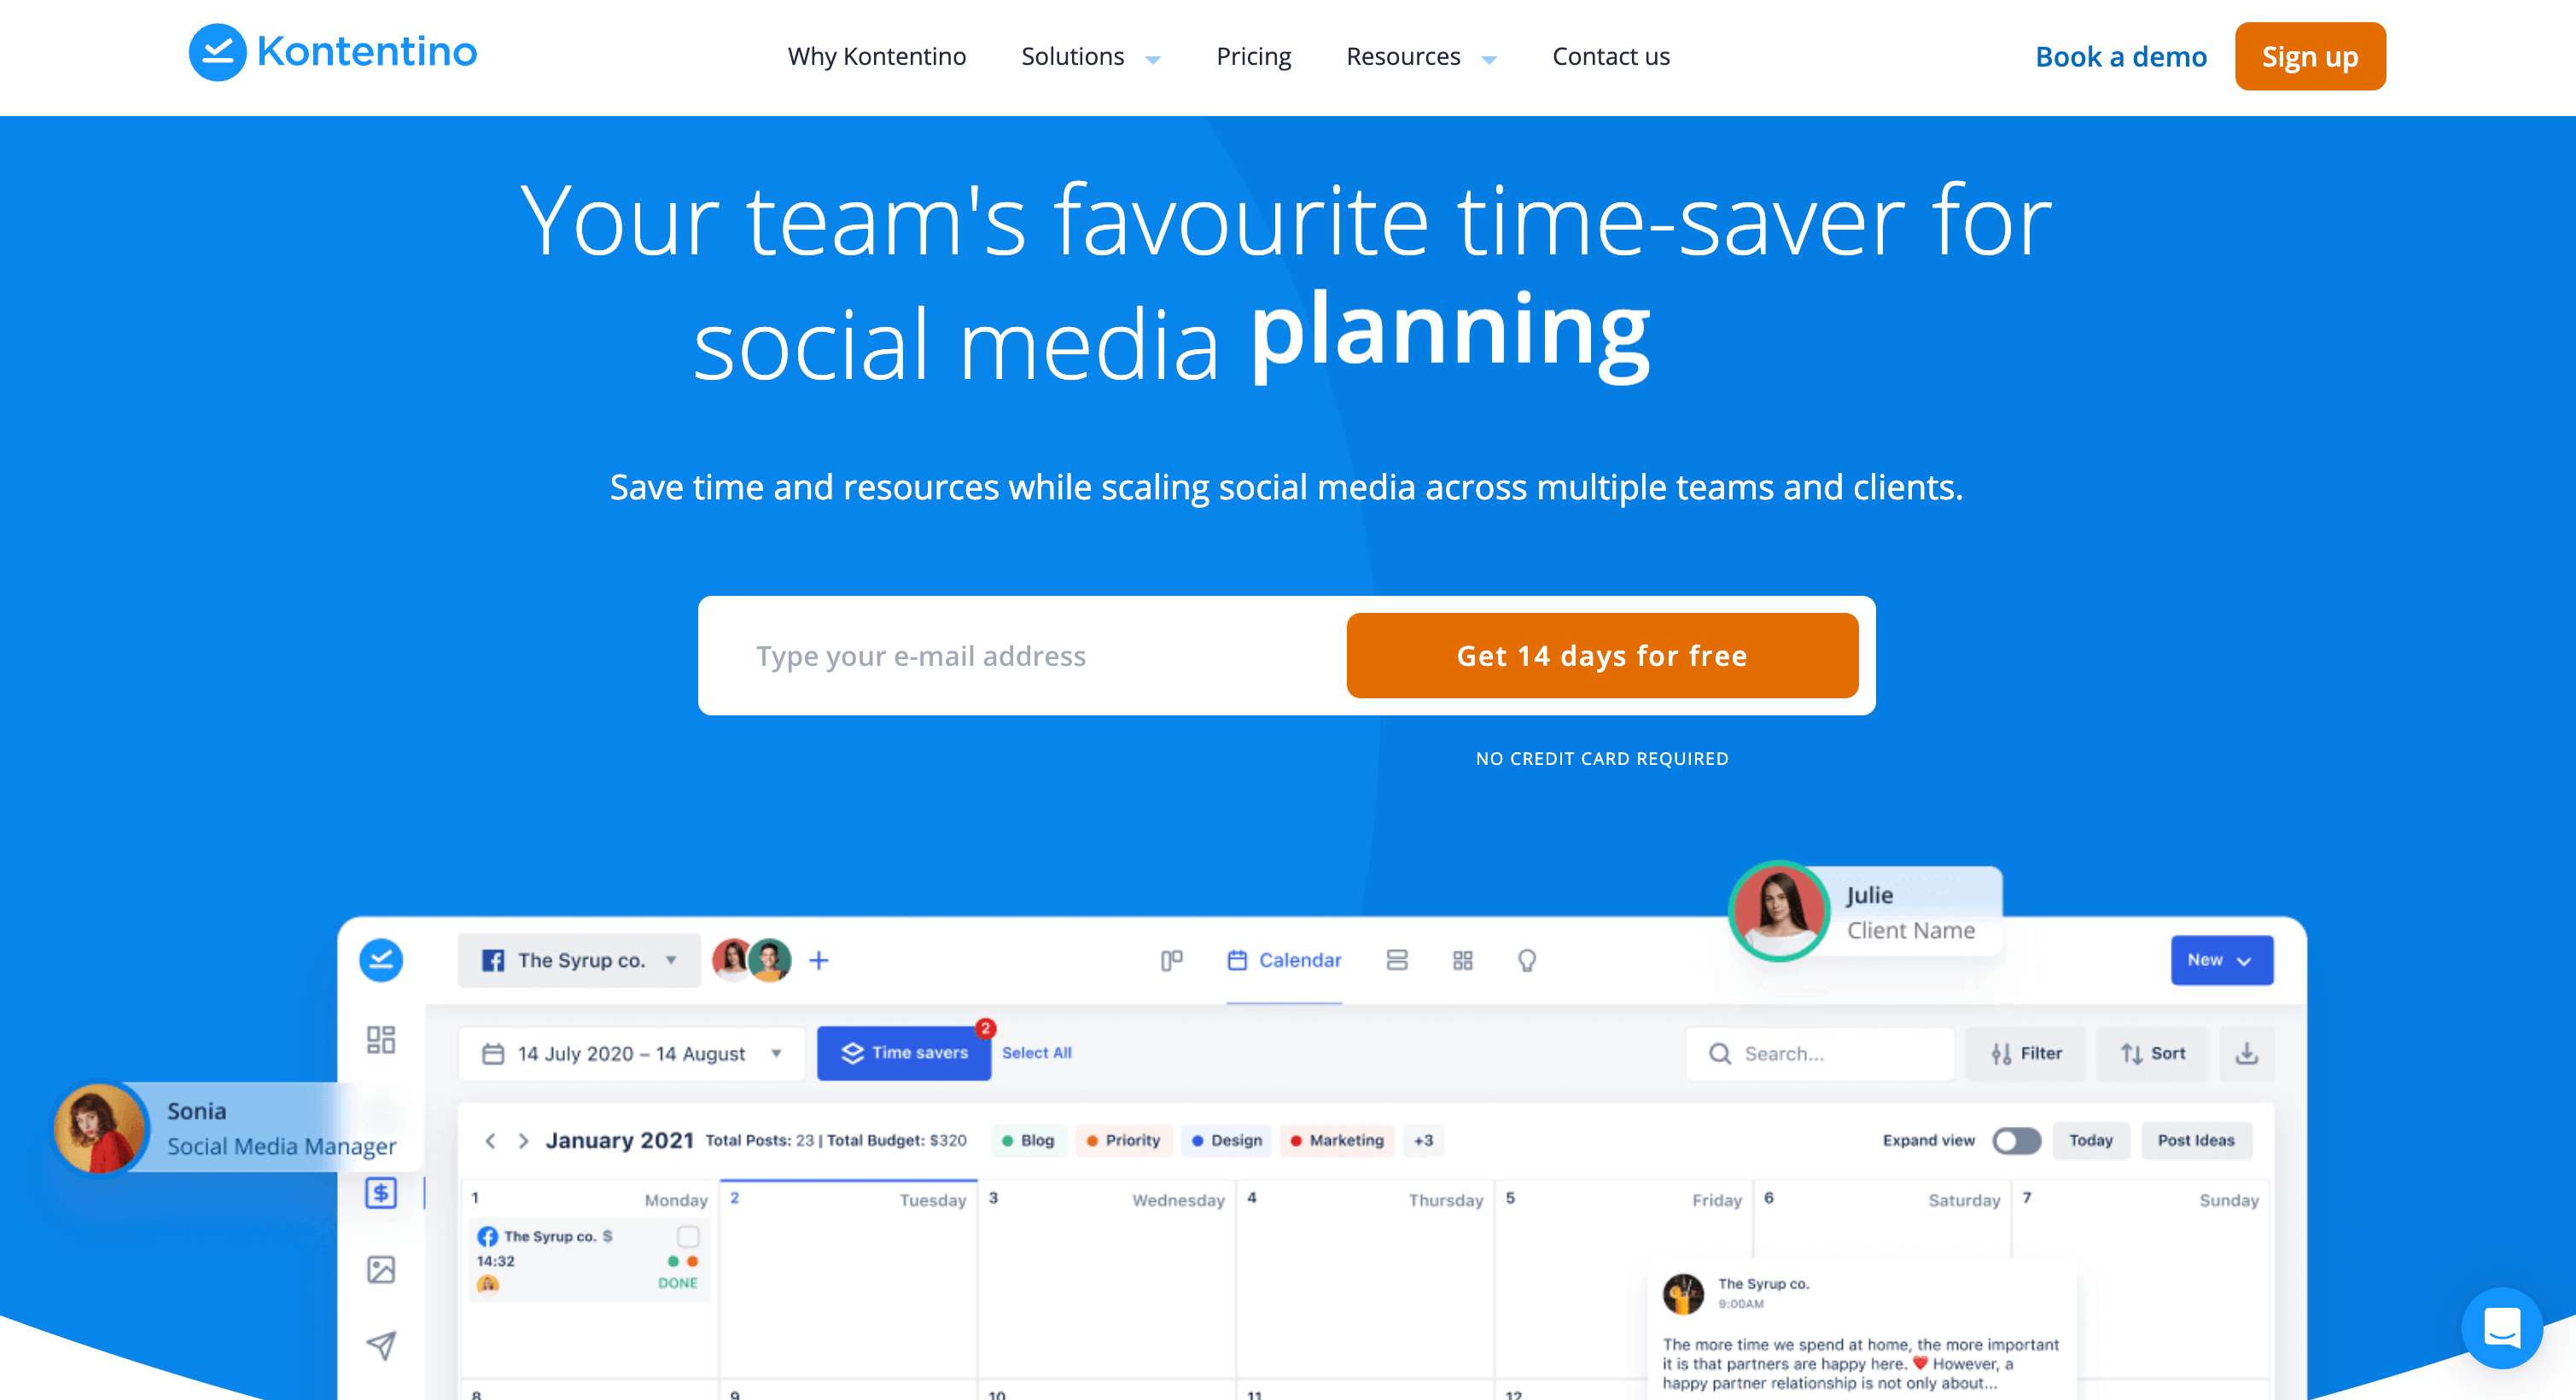 Konentino blue homepage showing a content calendar with social media manager and client collaboration on posts.